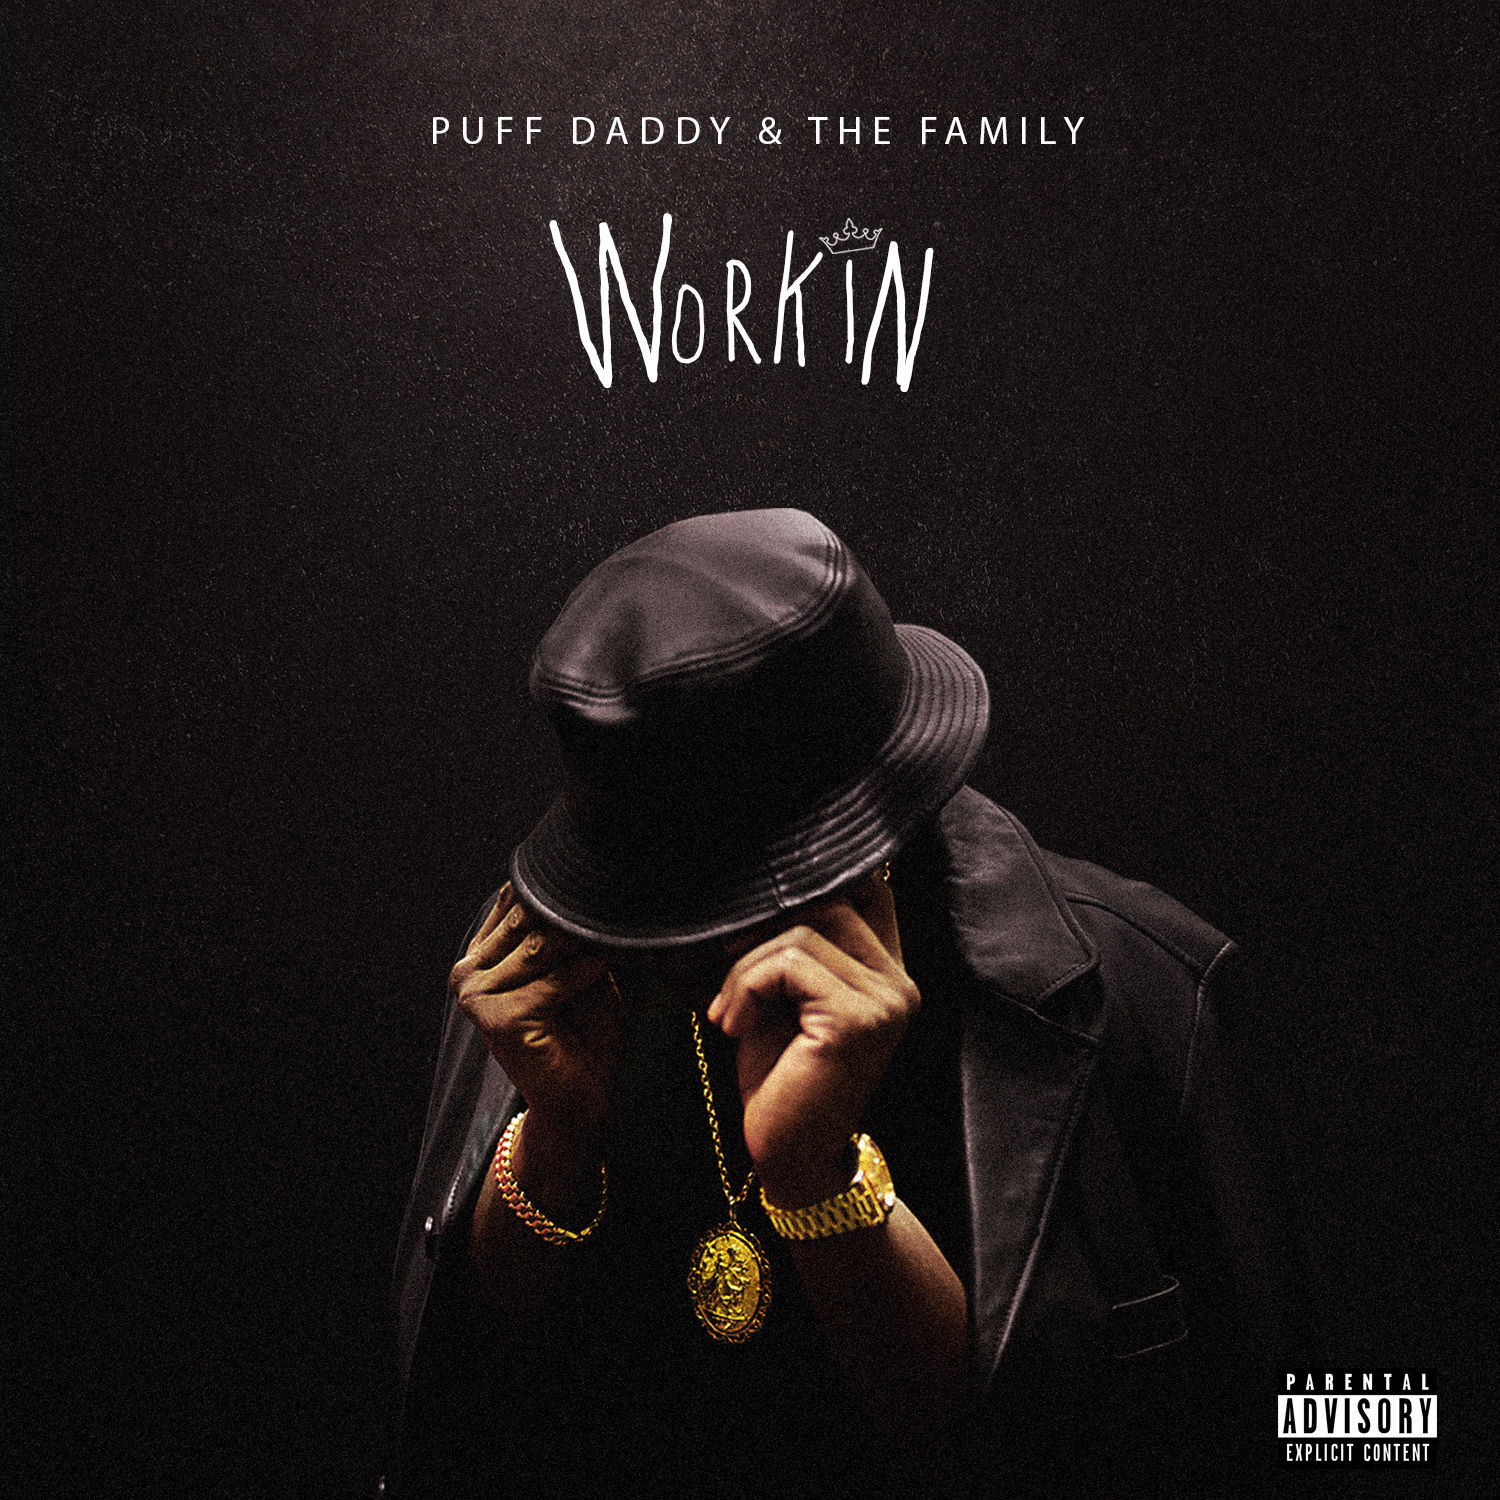 Puff Daddy and The Family - Workin (Cover)